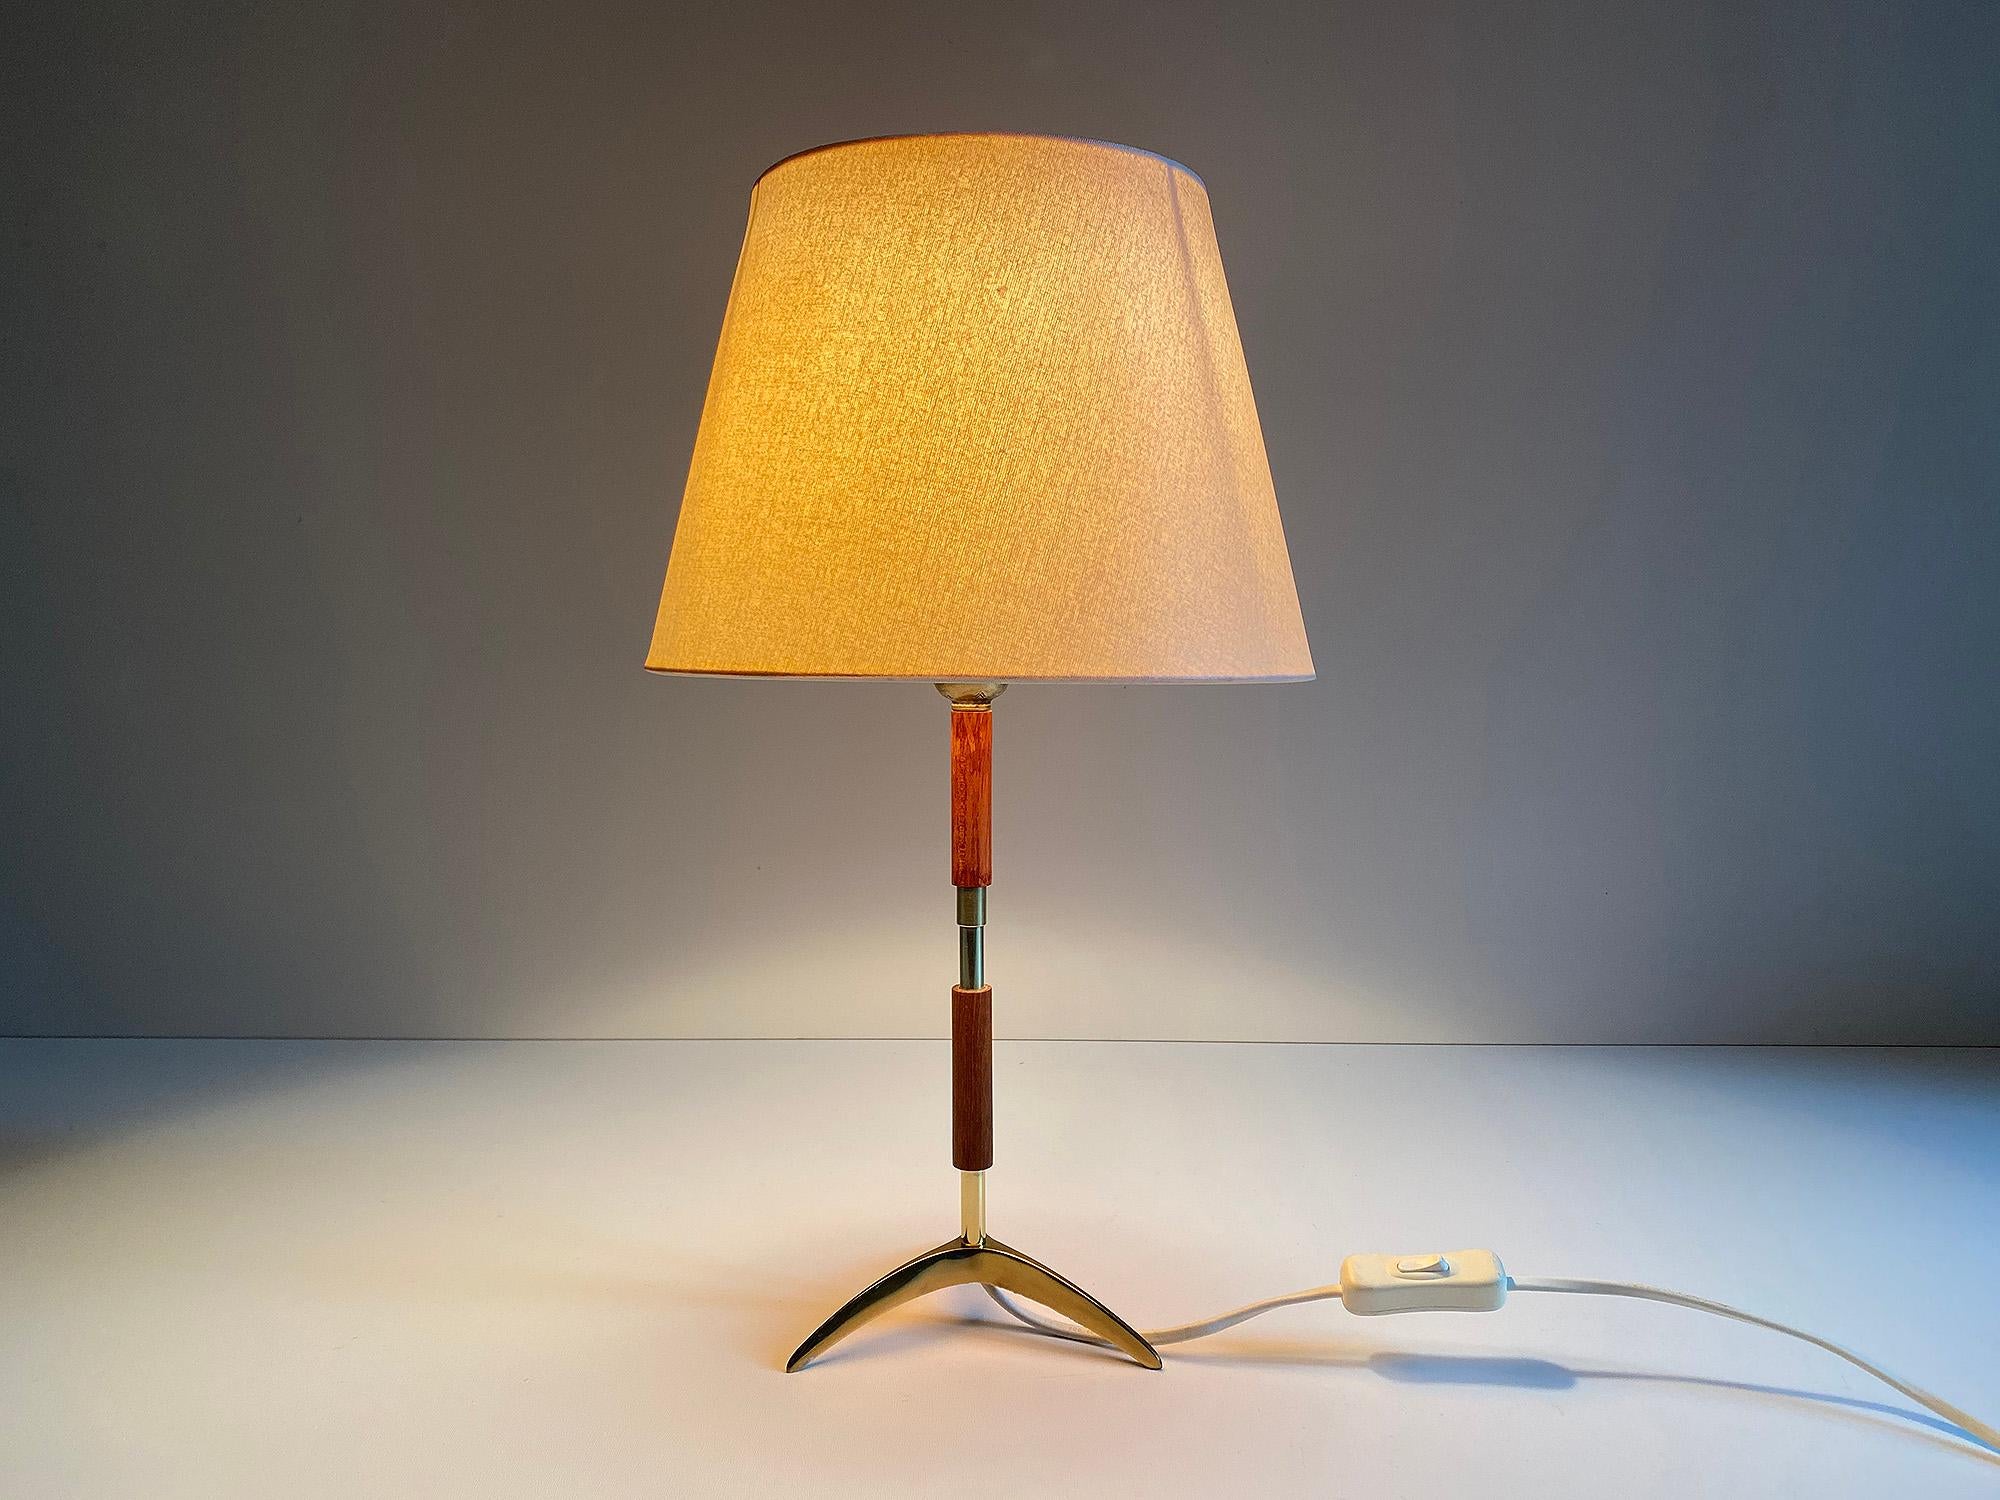 Midcentury Fog & Mørup Denmark table or desk lamp, featuring a bronze tripod base, teak and brass stem, laminated fabric shade in cream color
Wiring: The lamps have been tested with US American light bulbs under 120v and they work flawlessly.